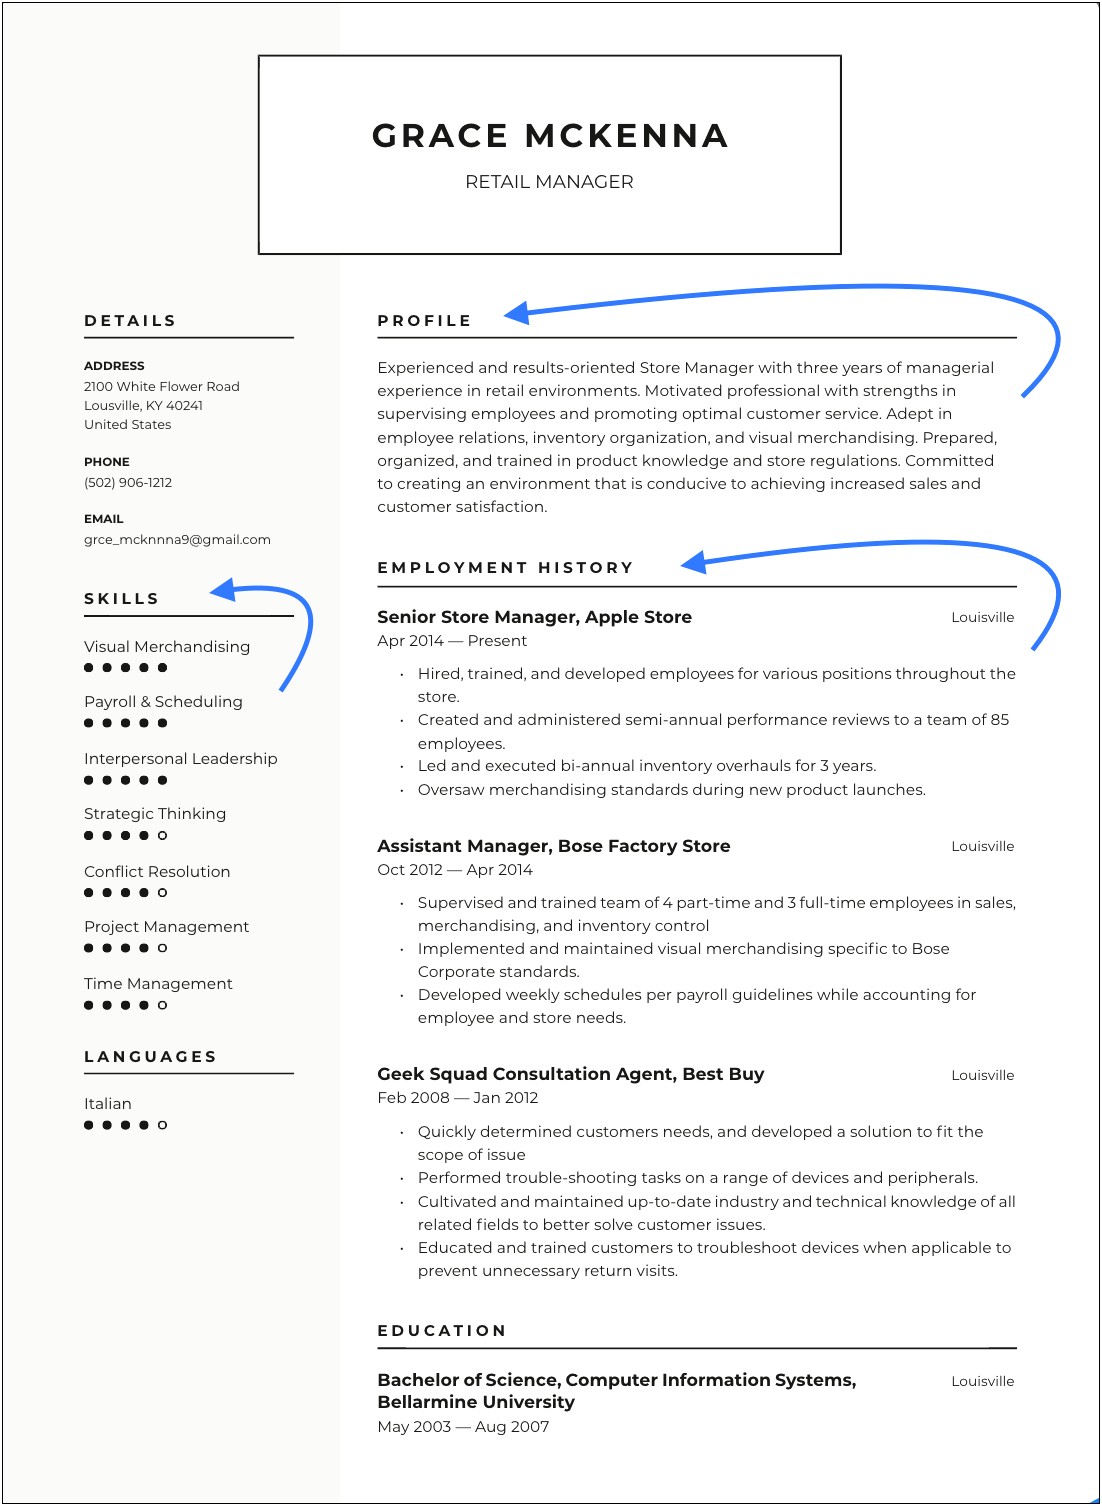 Resume Skills Examples With Description